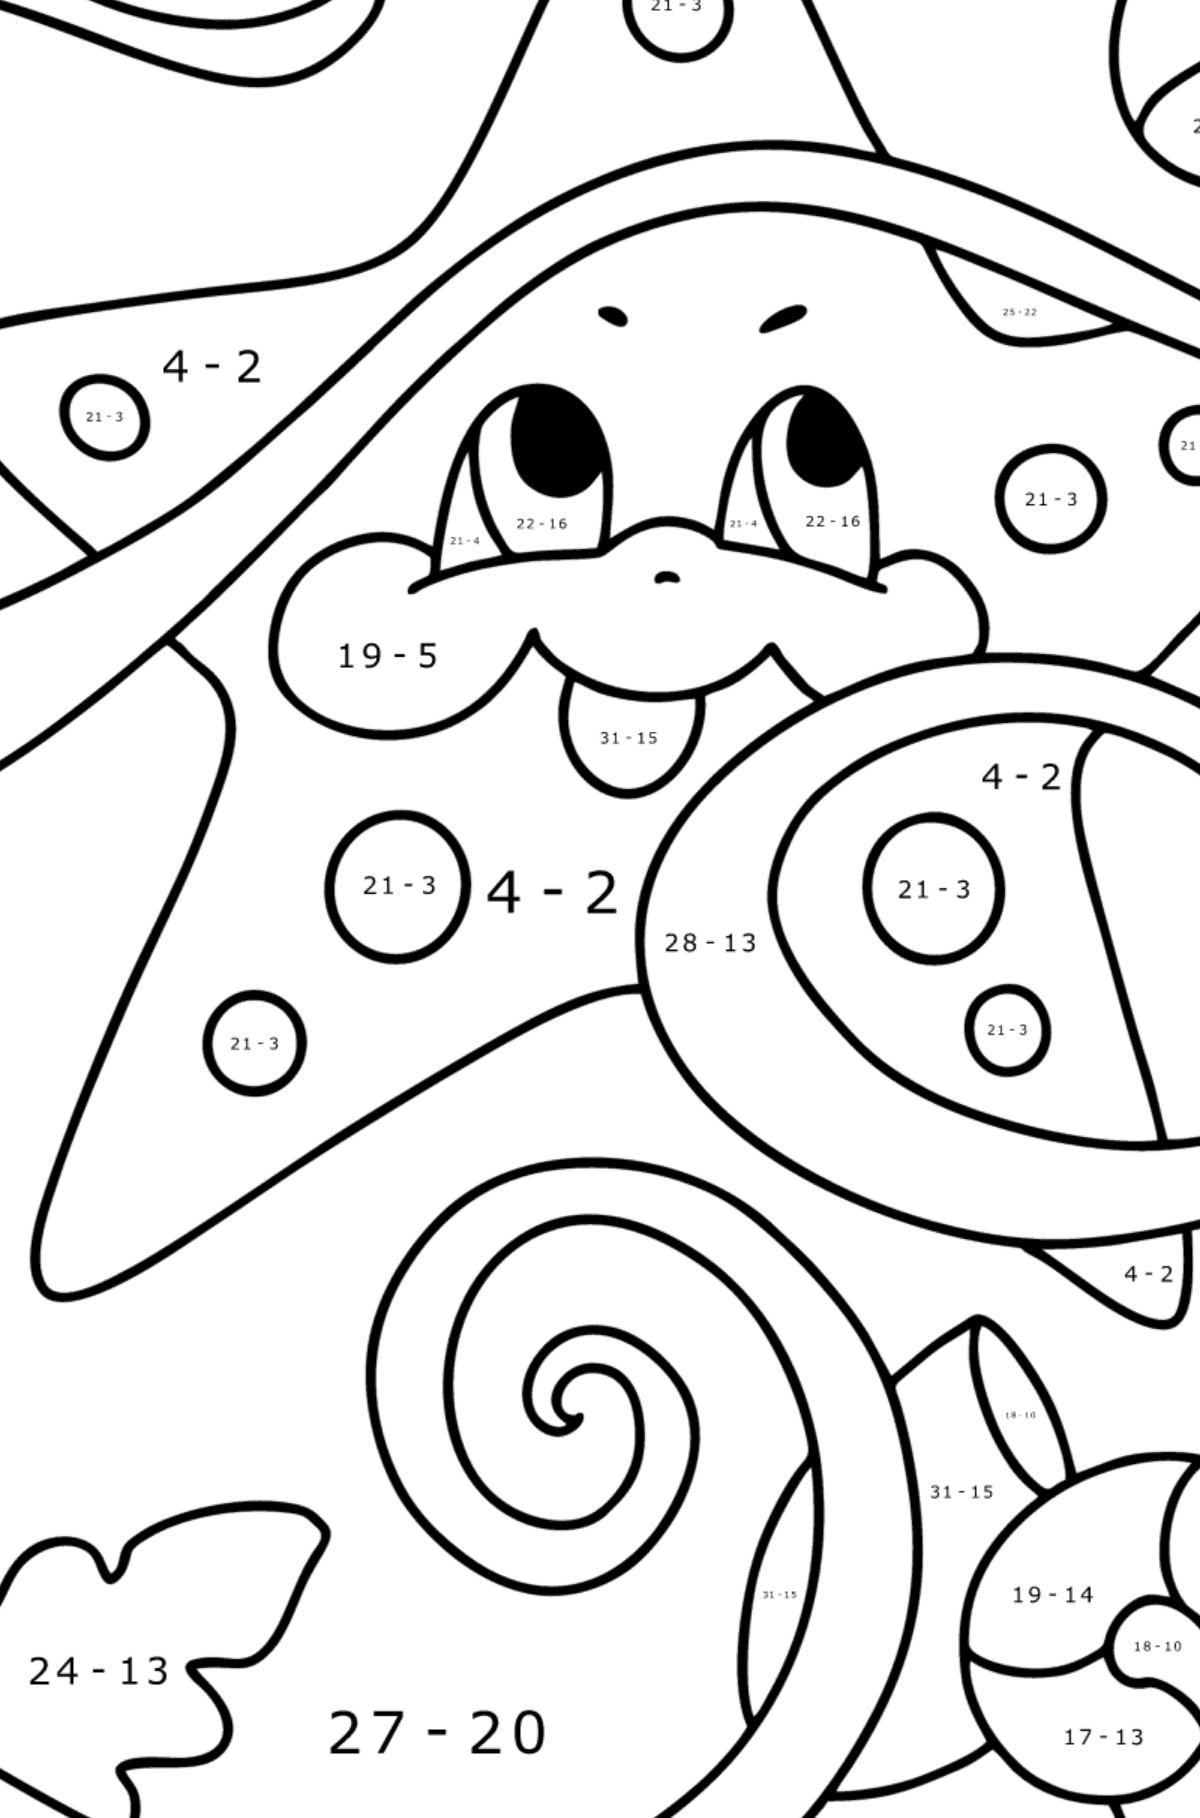 Baby starfish coloring page - Math Coloring - Subtraction for Kids